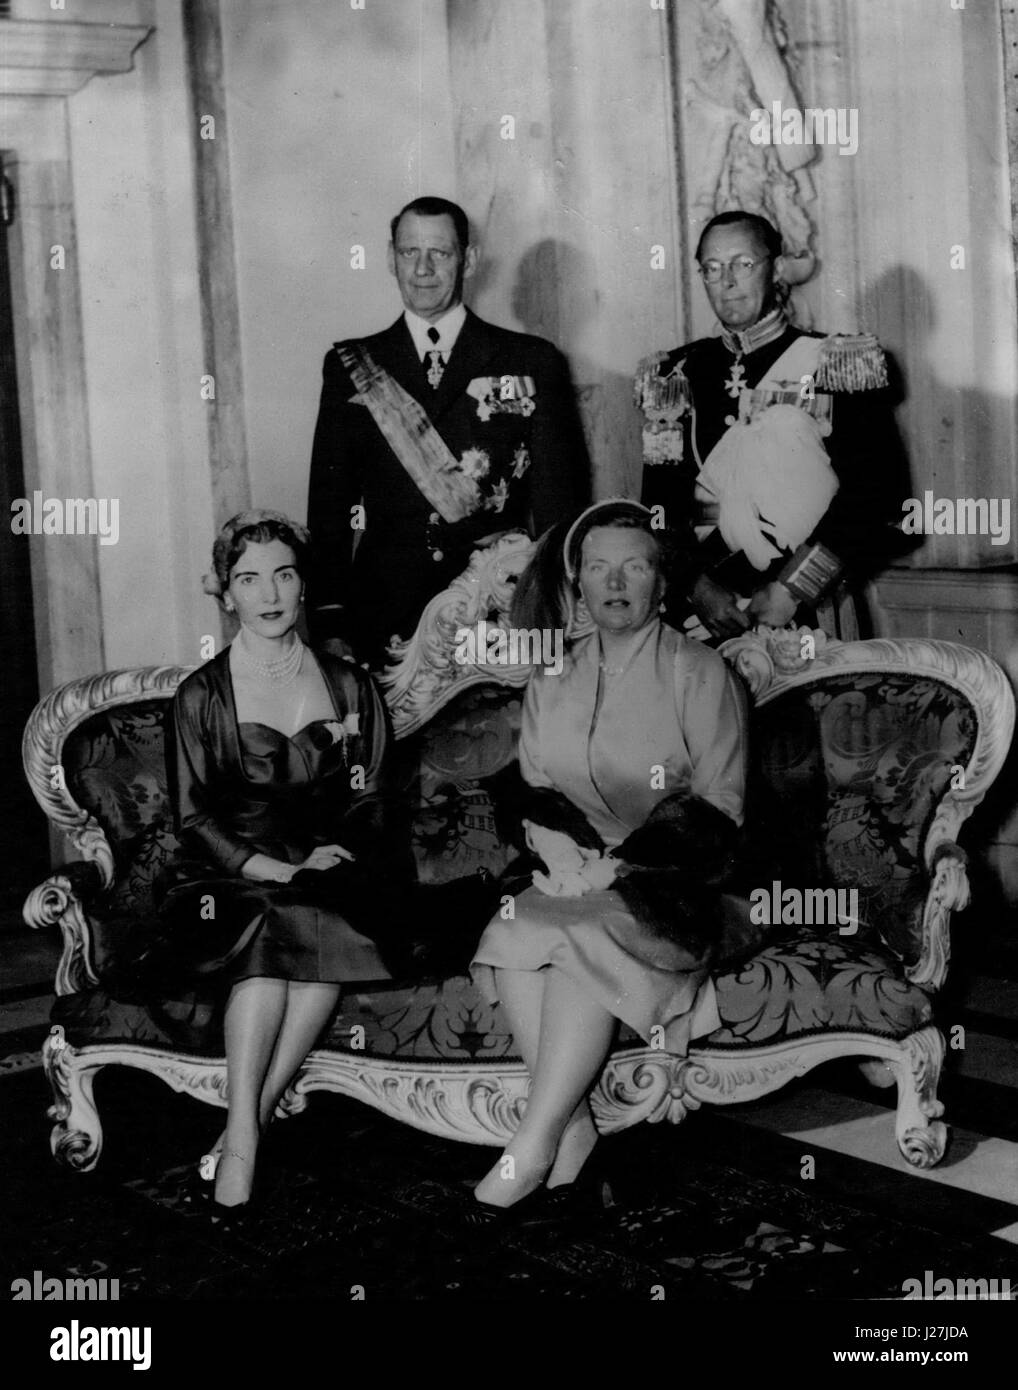 Apr. 26, 1954 - Danish Royal visit to the Netherlands.: King Frederik and Queen Ingrid of Denmark, have arrived in Holland on a three-day State visit. They were met on their arrival by Queen Juliana and Prince Bernhard and driven to the Royal Palace in Amsterdam. Photo shows a picture taken in the Royal Palace of King Frederik and Queen Ingrid with their hosts Queen Juliana and Prince Bernhard. (Credit Image: © Keystone Press Agency/Keystone USA via ZUMAPRESS.com) Stock Photo